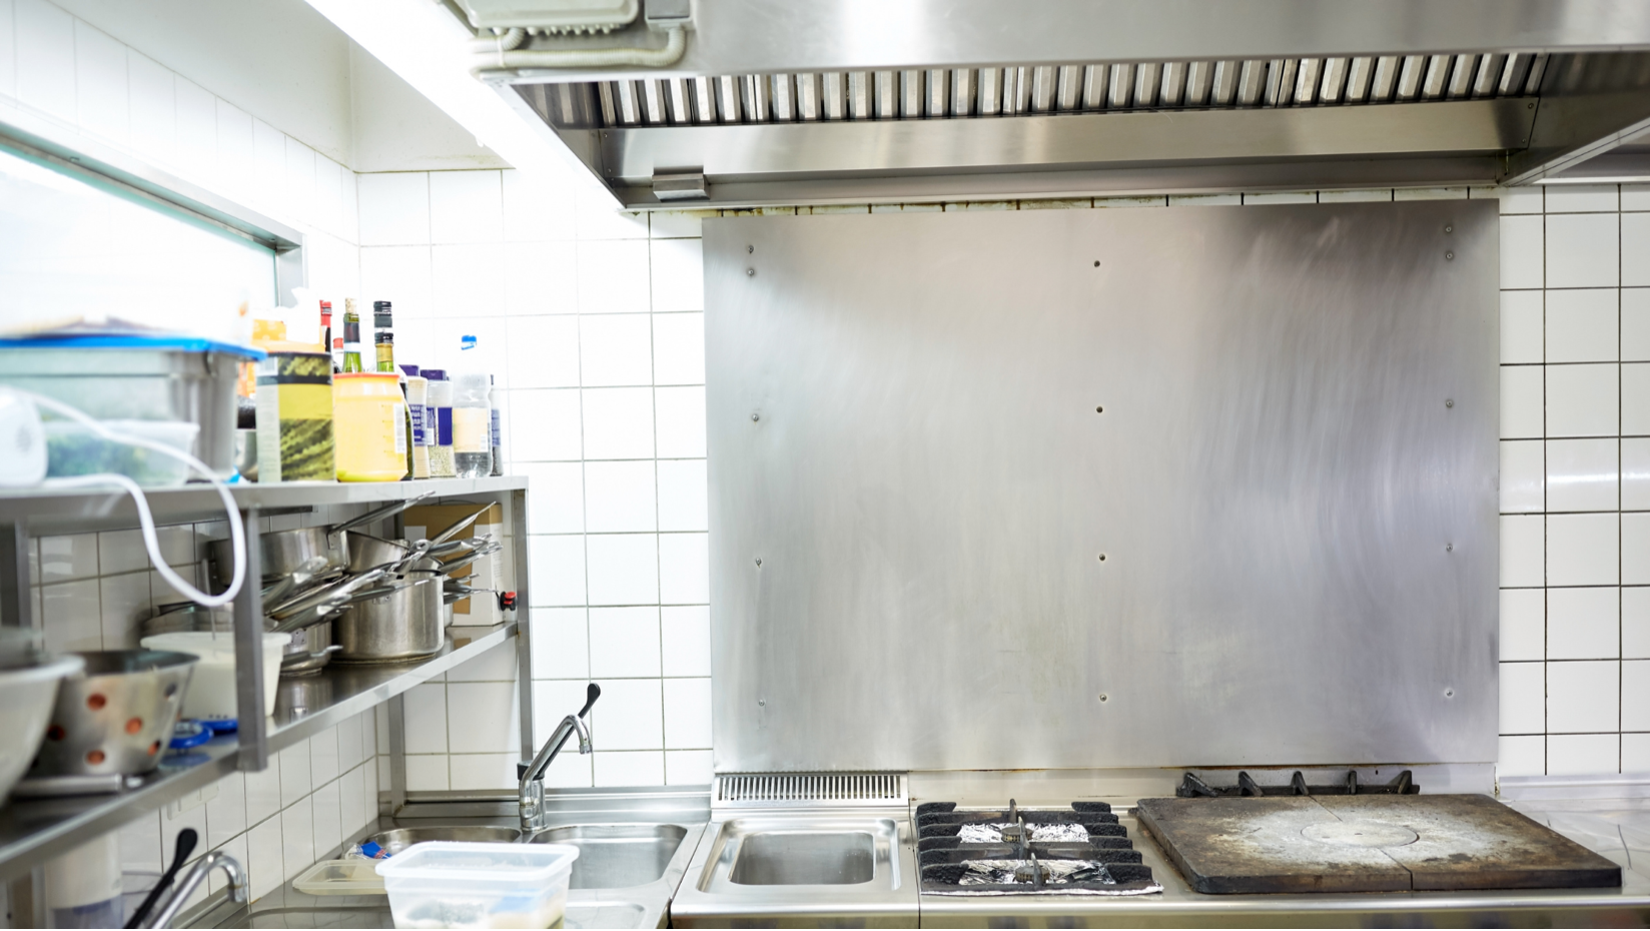 Why You Should Hire A Commercial Cleaning Service In Lenexa For Your Restaurant